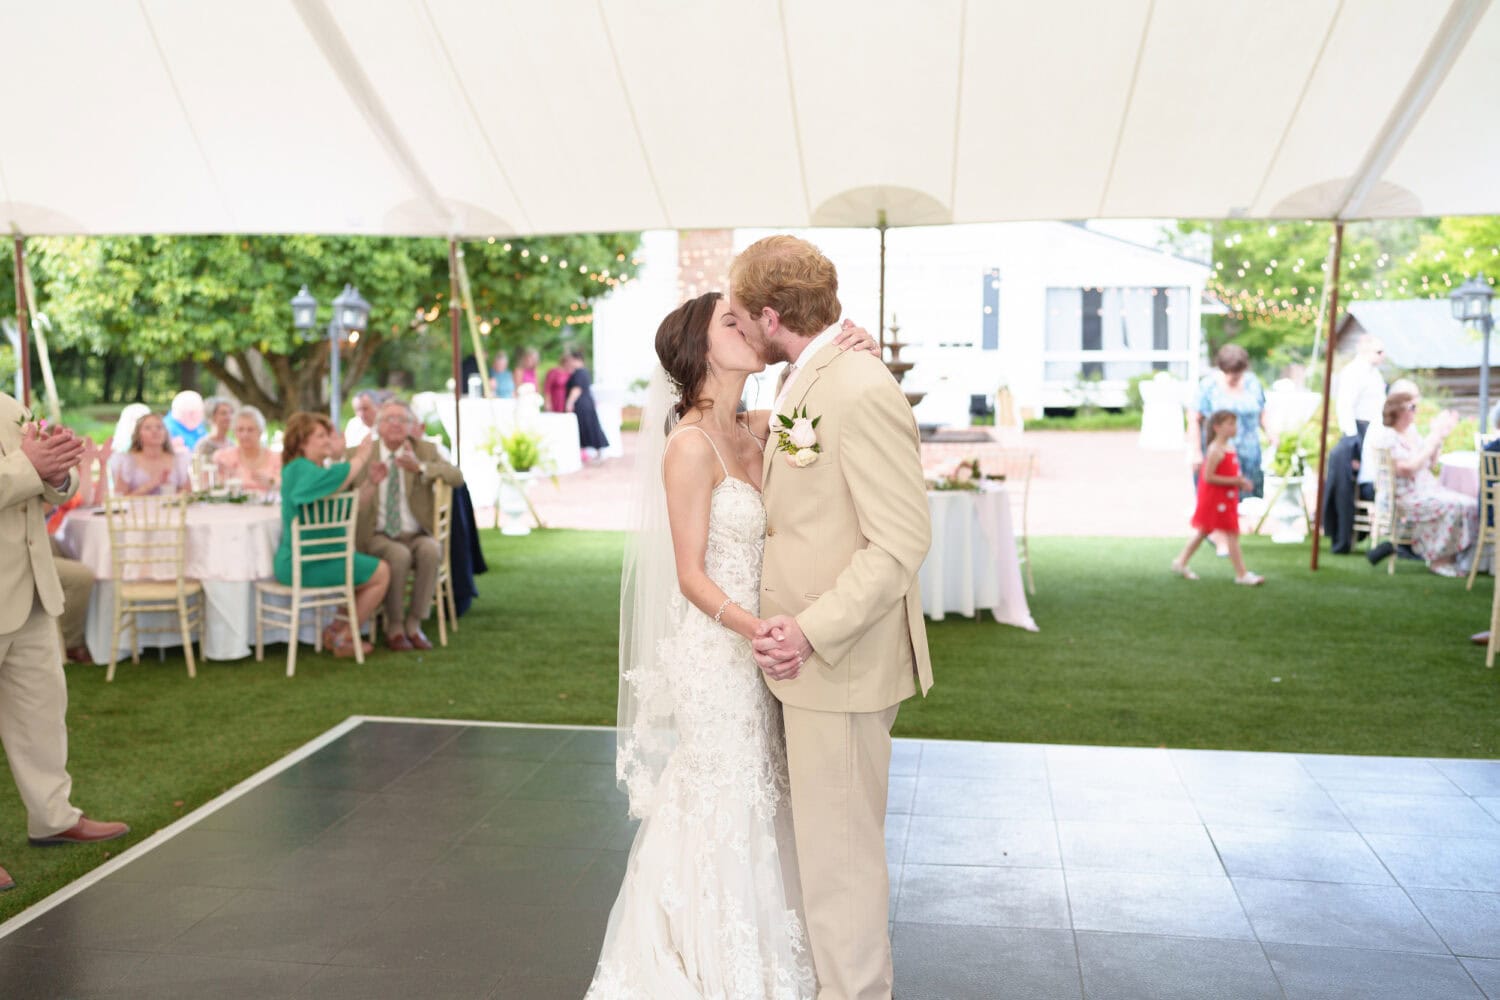 First dance under the tent - Tanglewood Plantation